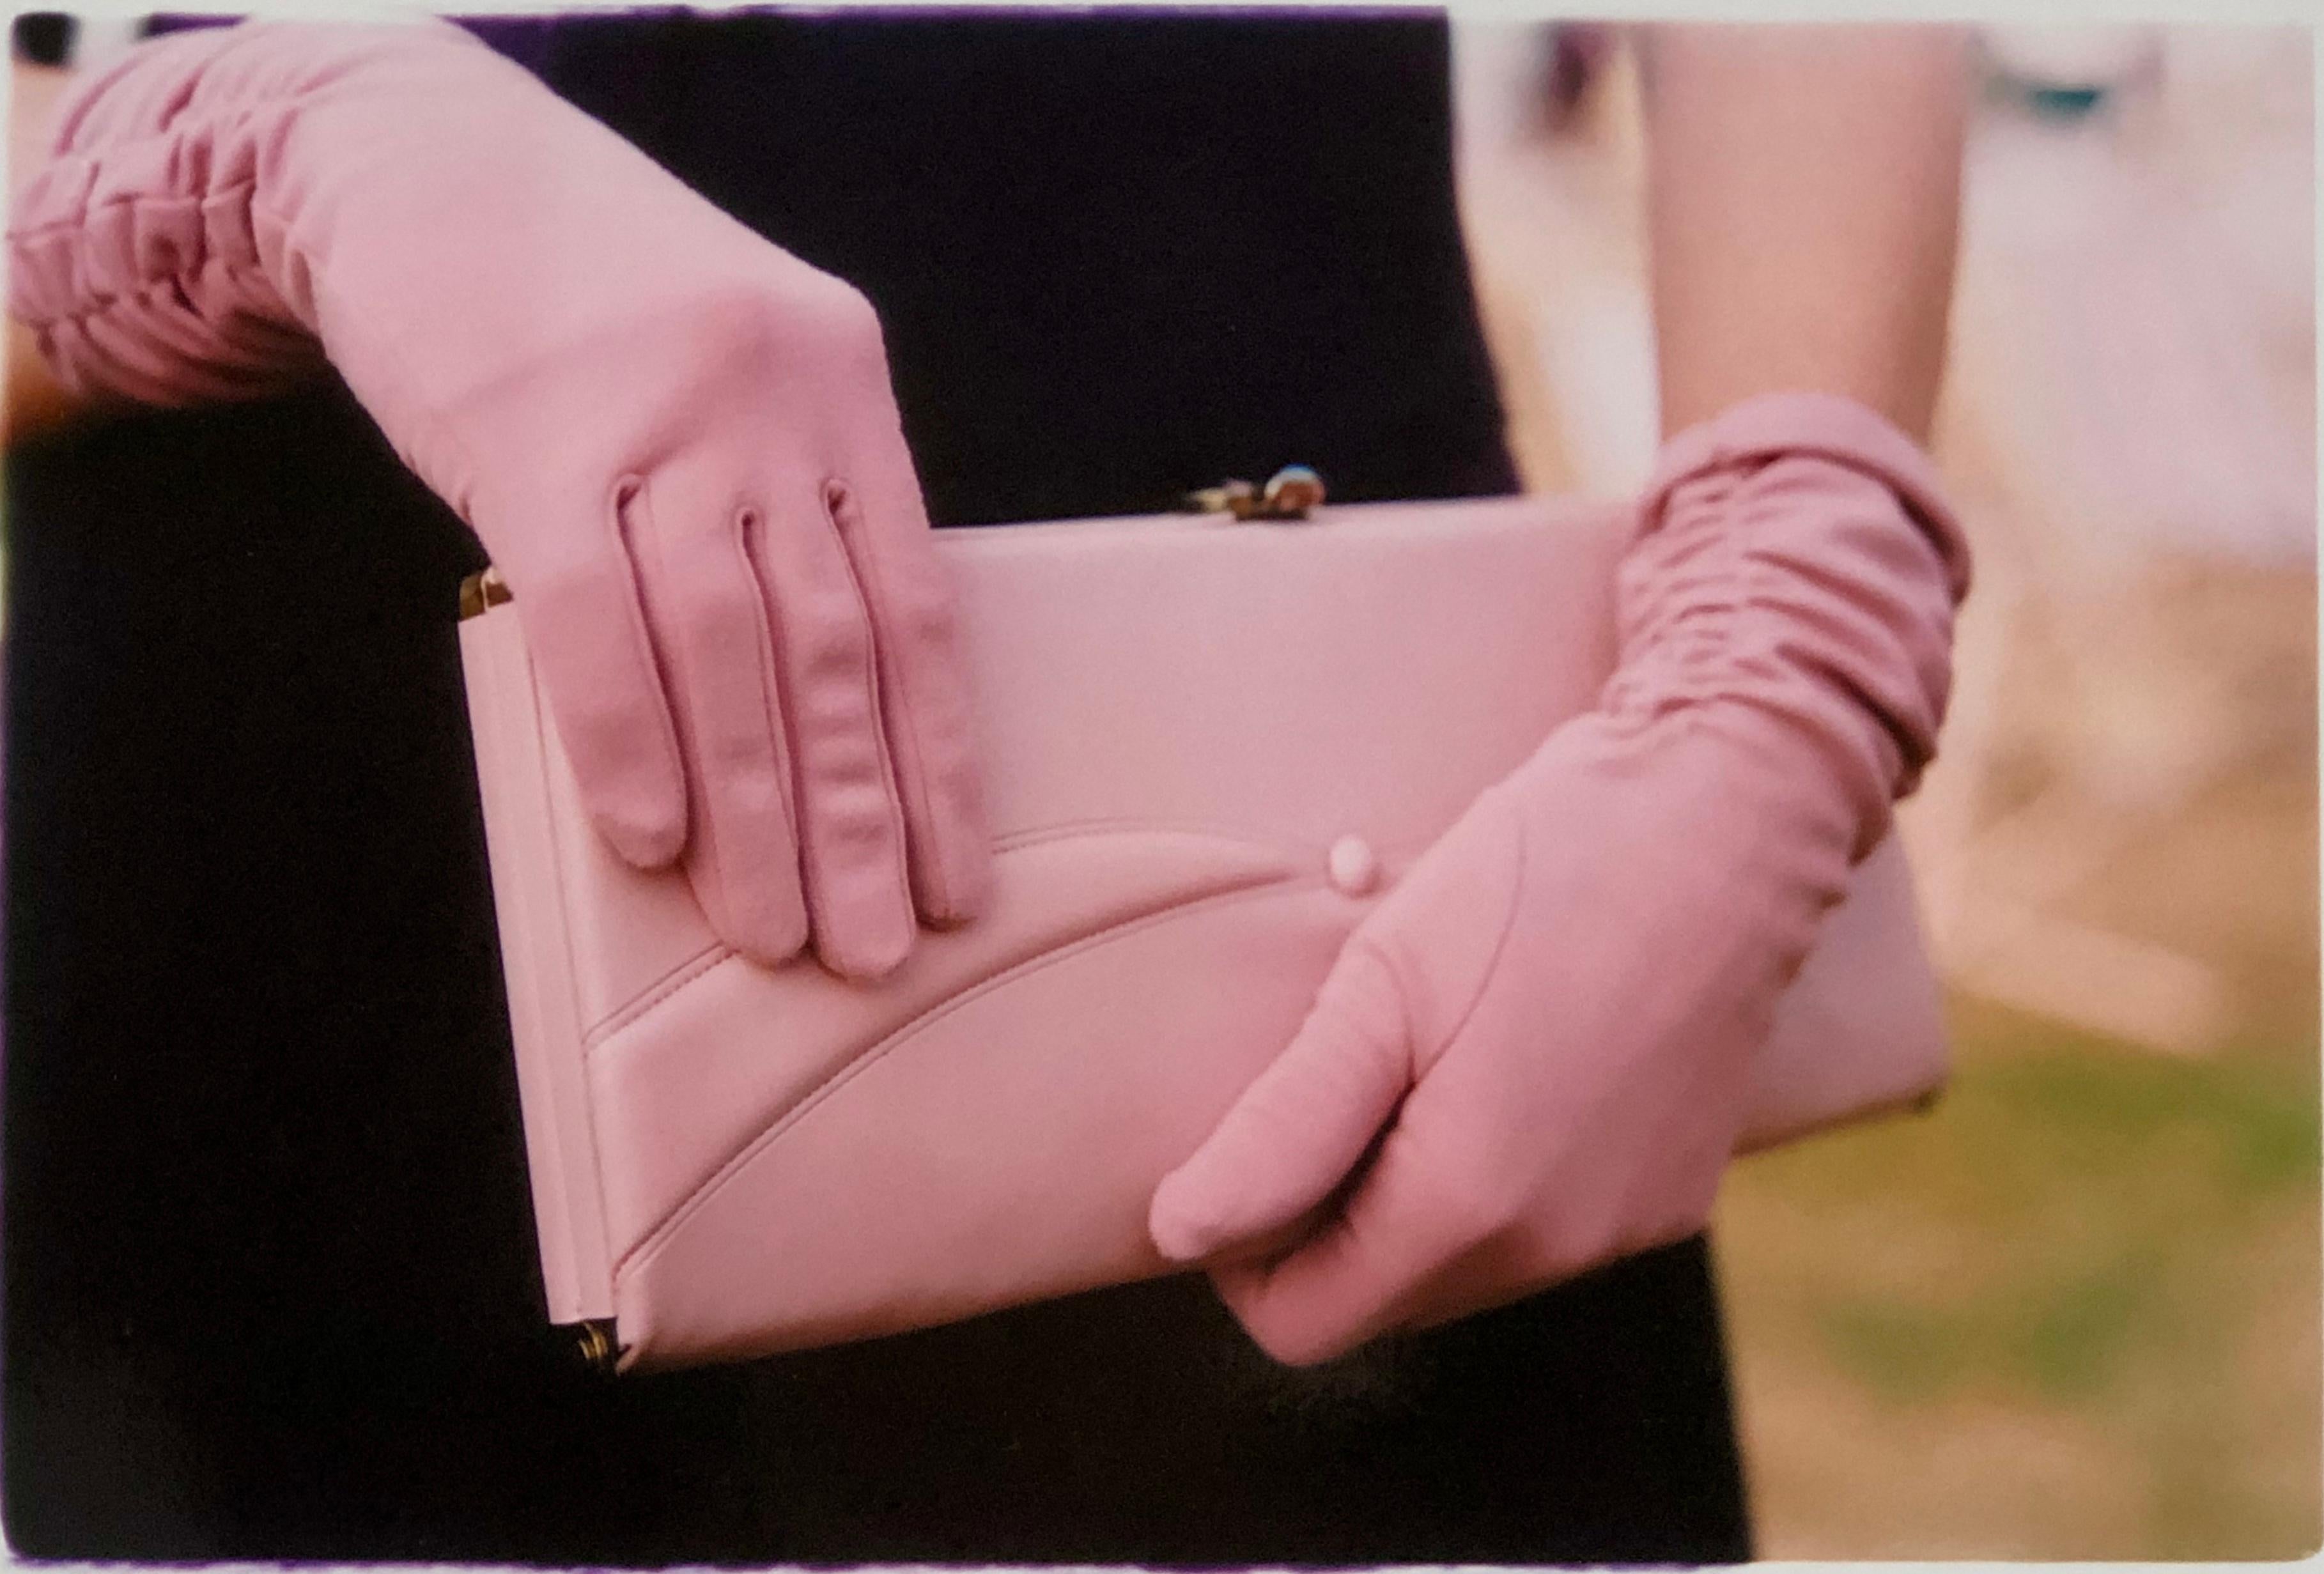 Richard Heeps Figurative Photograph - Pink Gloves, Goodwood, Chichester - Feminine fashion, color photography